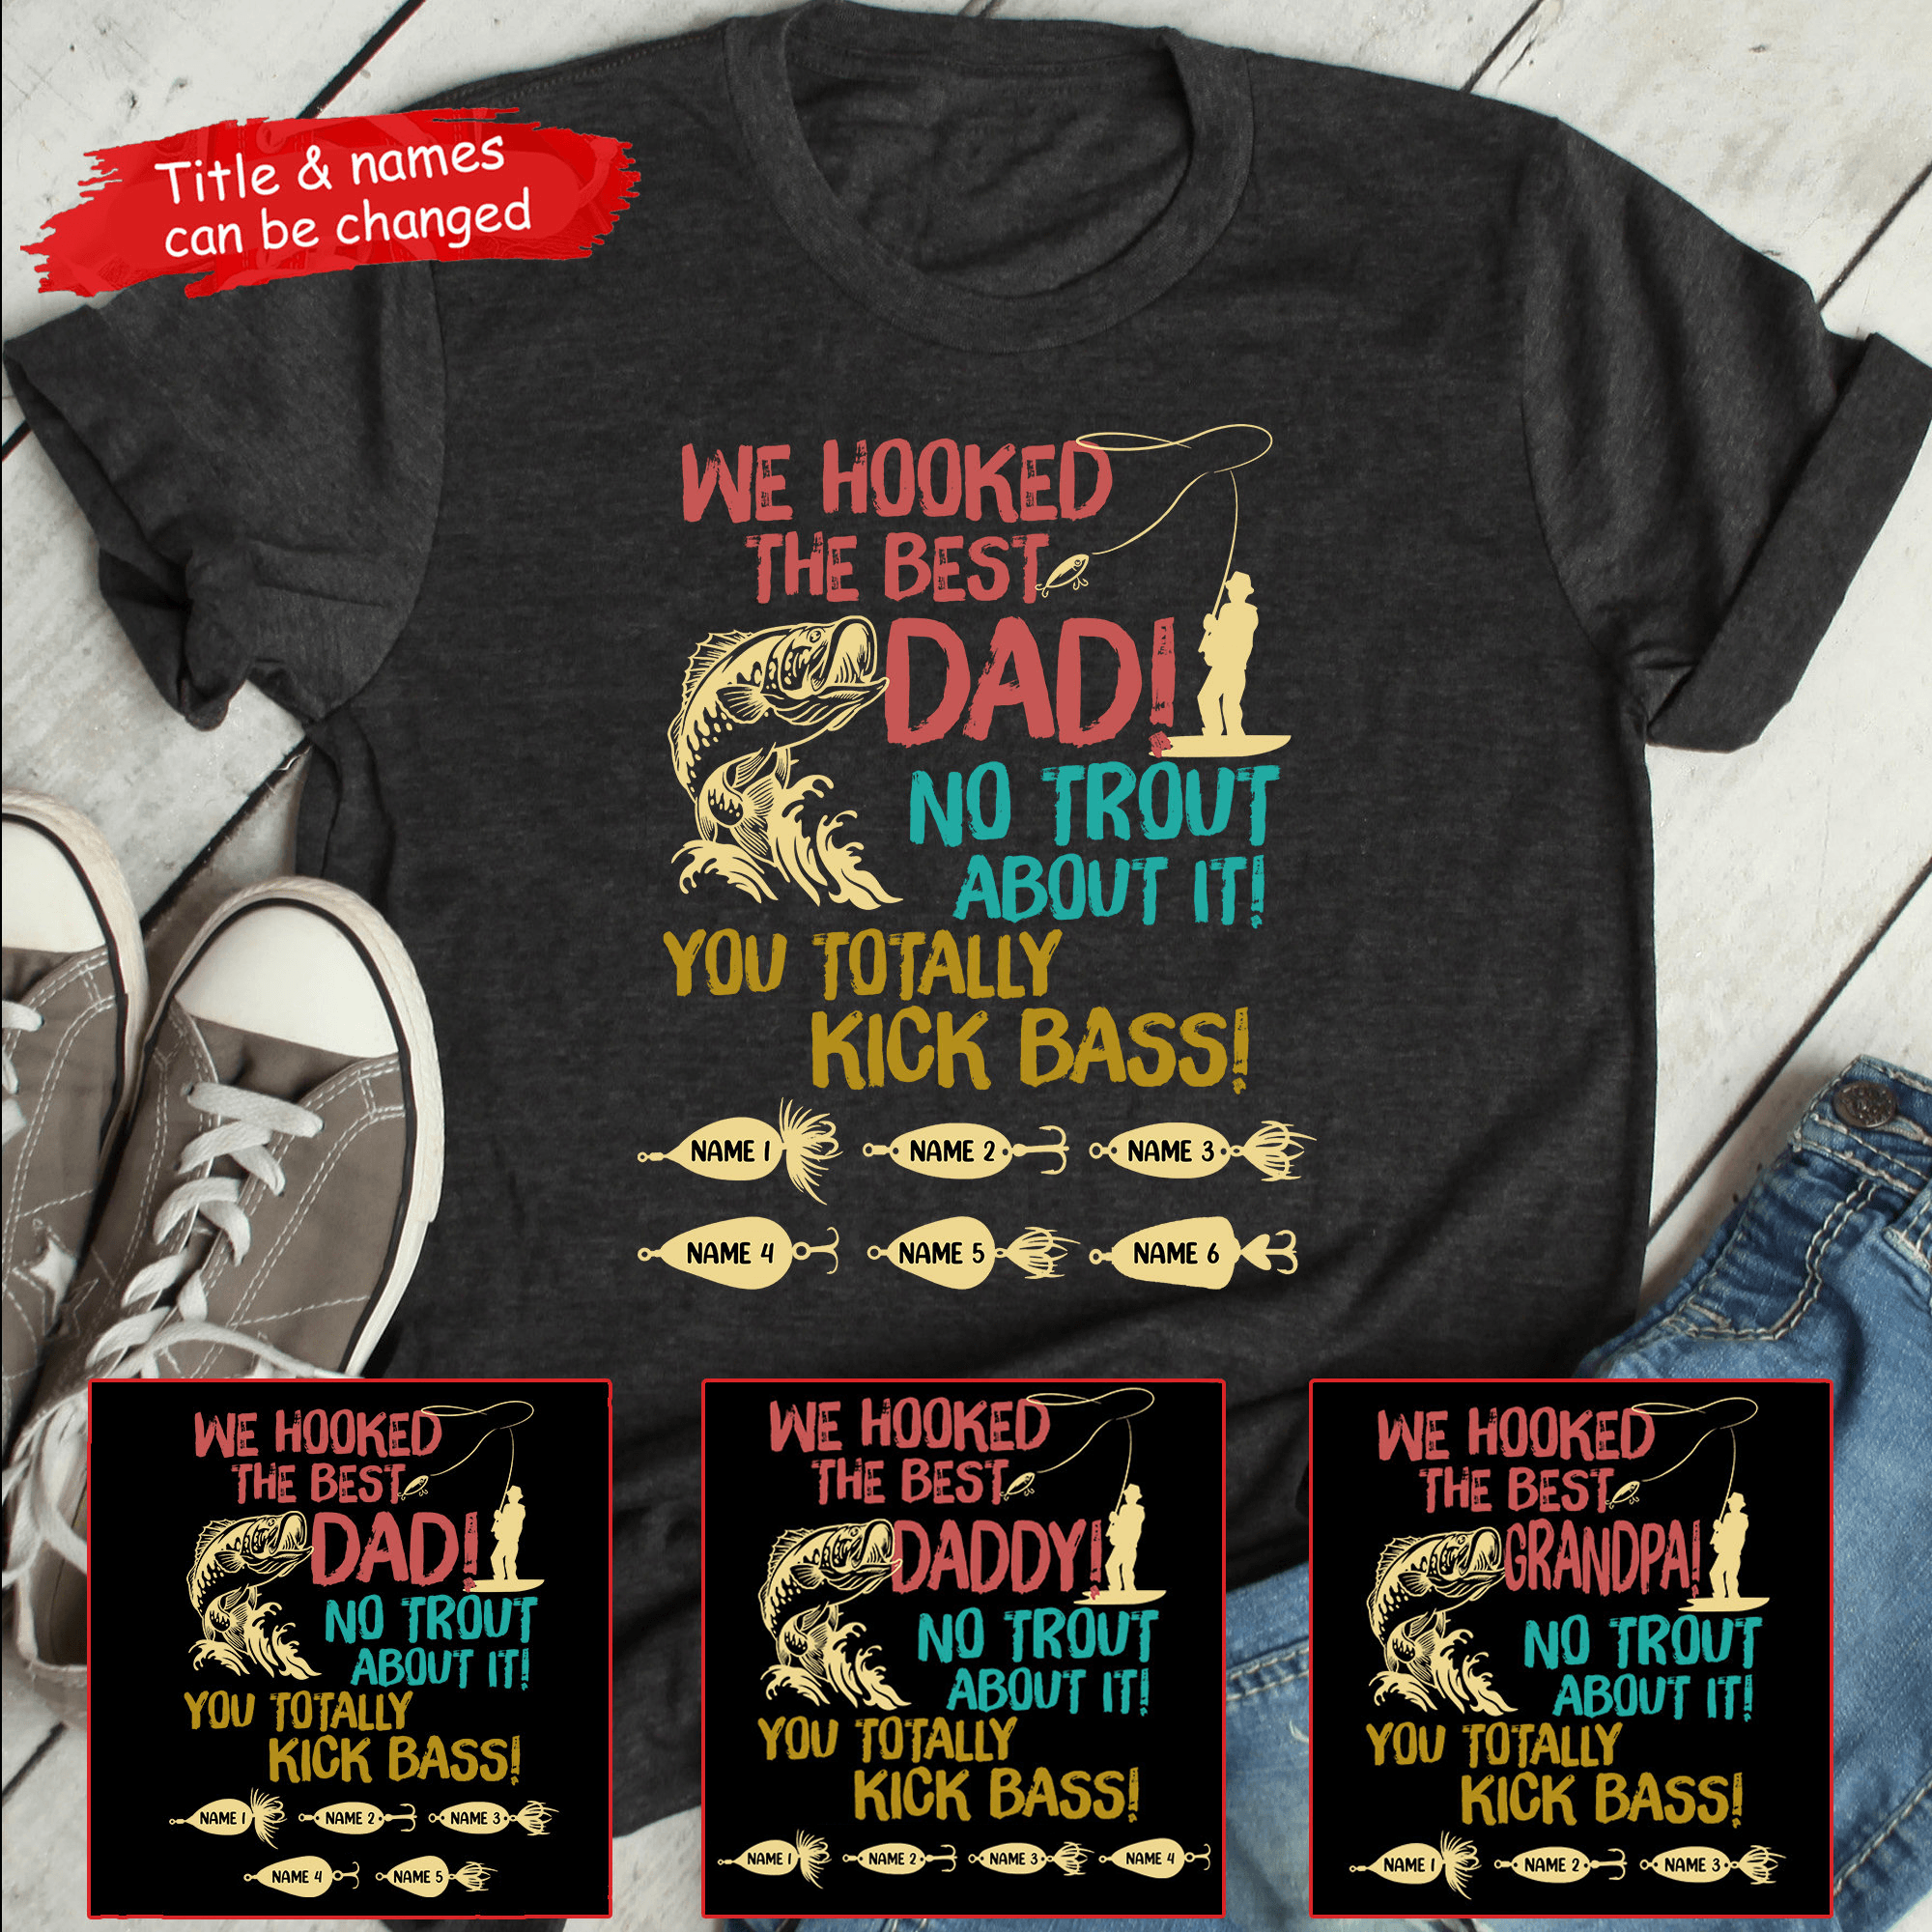 We Hooked The Best Dad, No Trout About It! - Personalized Custom Fishing T Shirt - Father's Day Funny Gift for Dad, Grandpa, Daddy, Dada, Husband, Dad Jokes, Reel Cool Dad - Suzitee Store